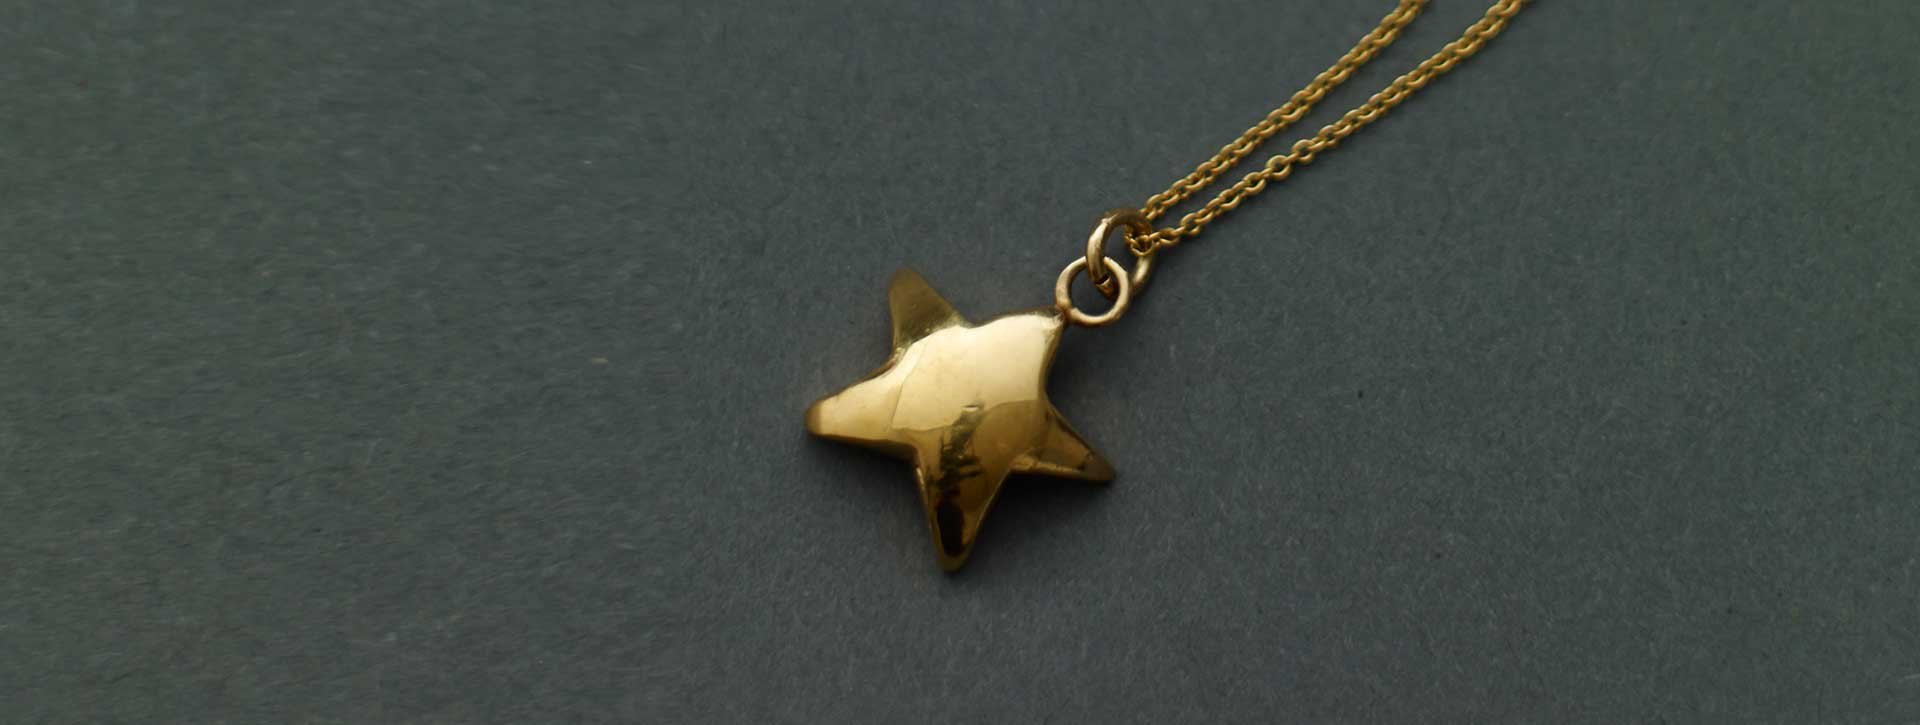 star necklace 18k gold plated